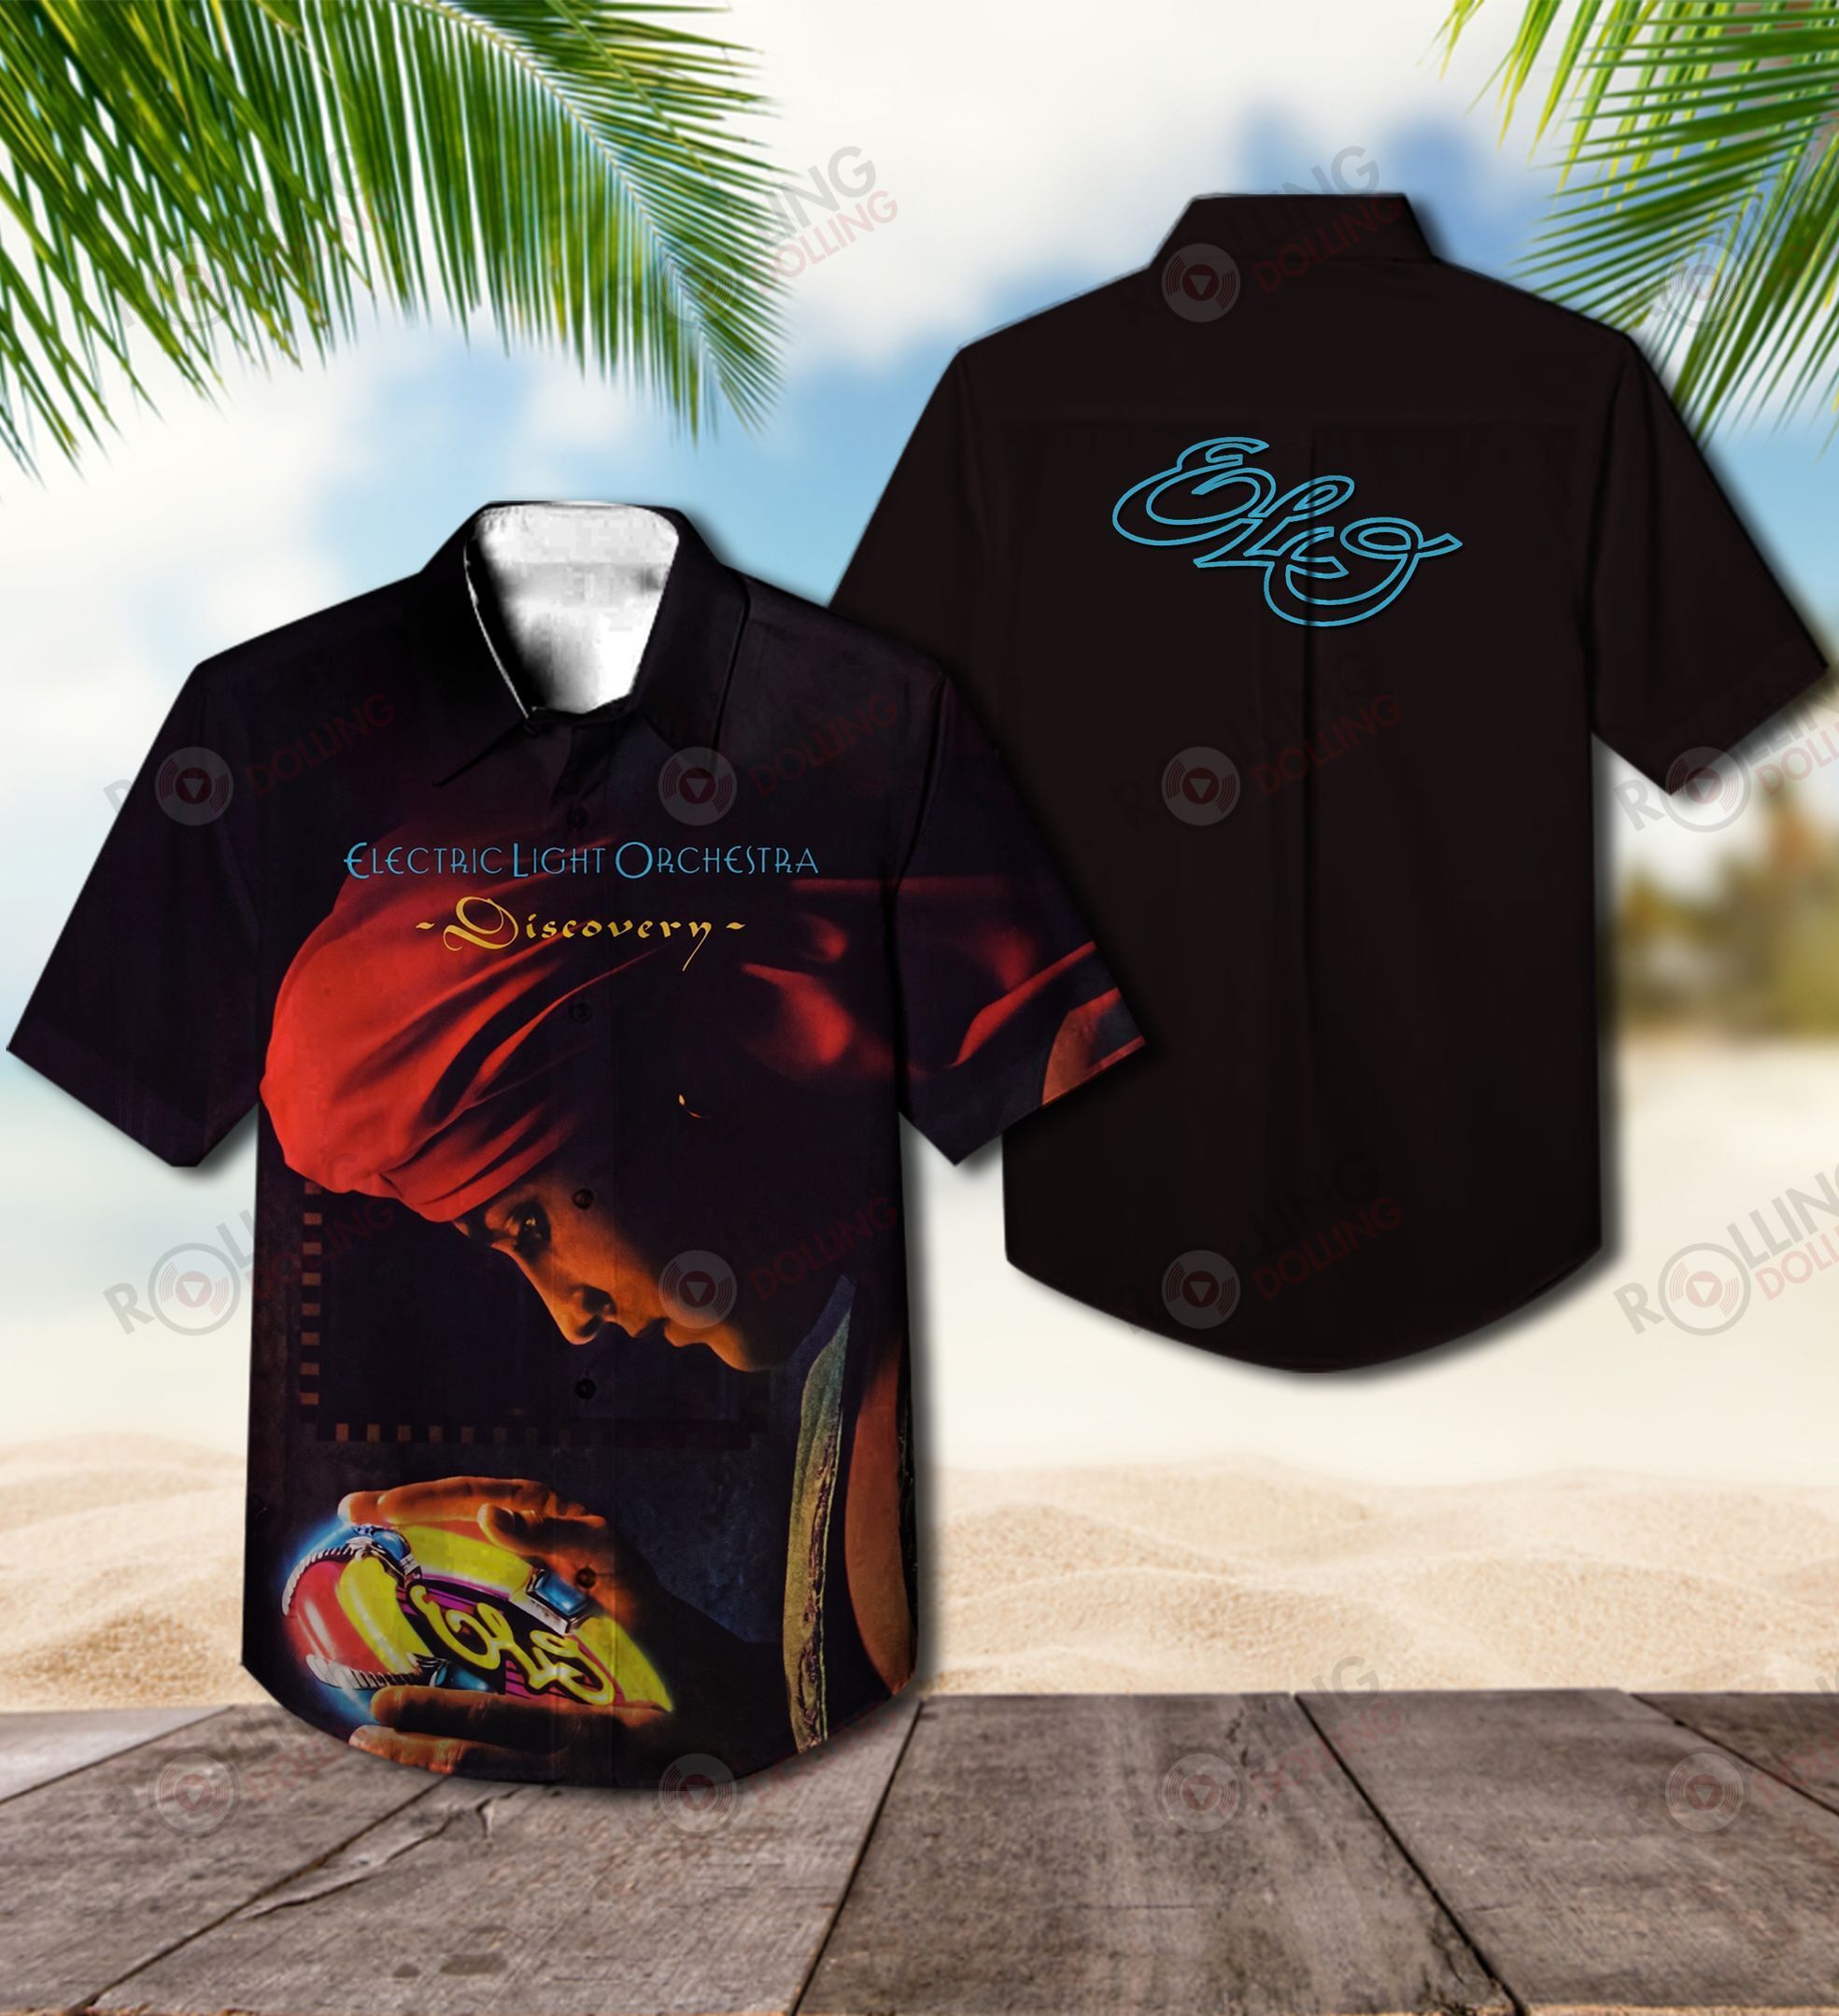 Now you can show off your love of all things band with this Hawaiian Shirt 3